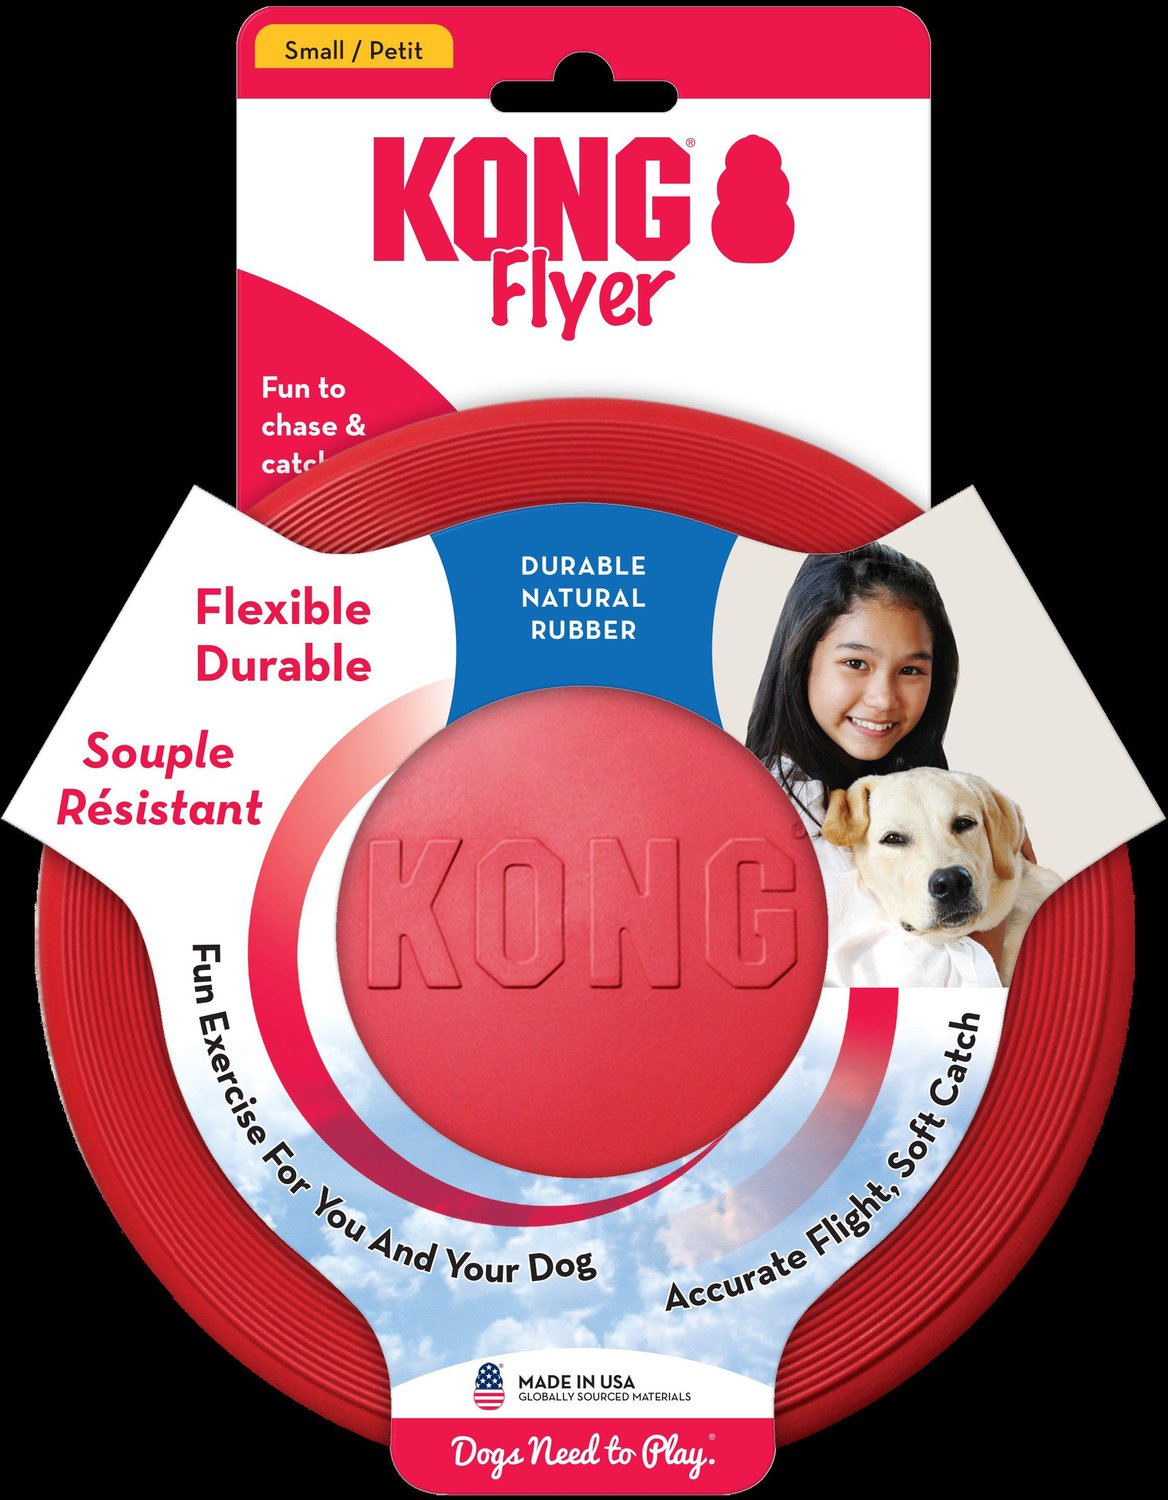 KONG Flyer Dog Toy, Small